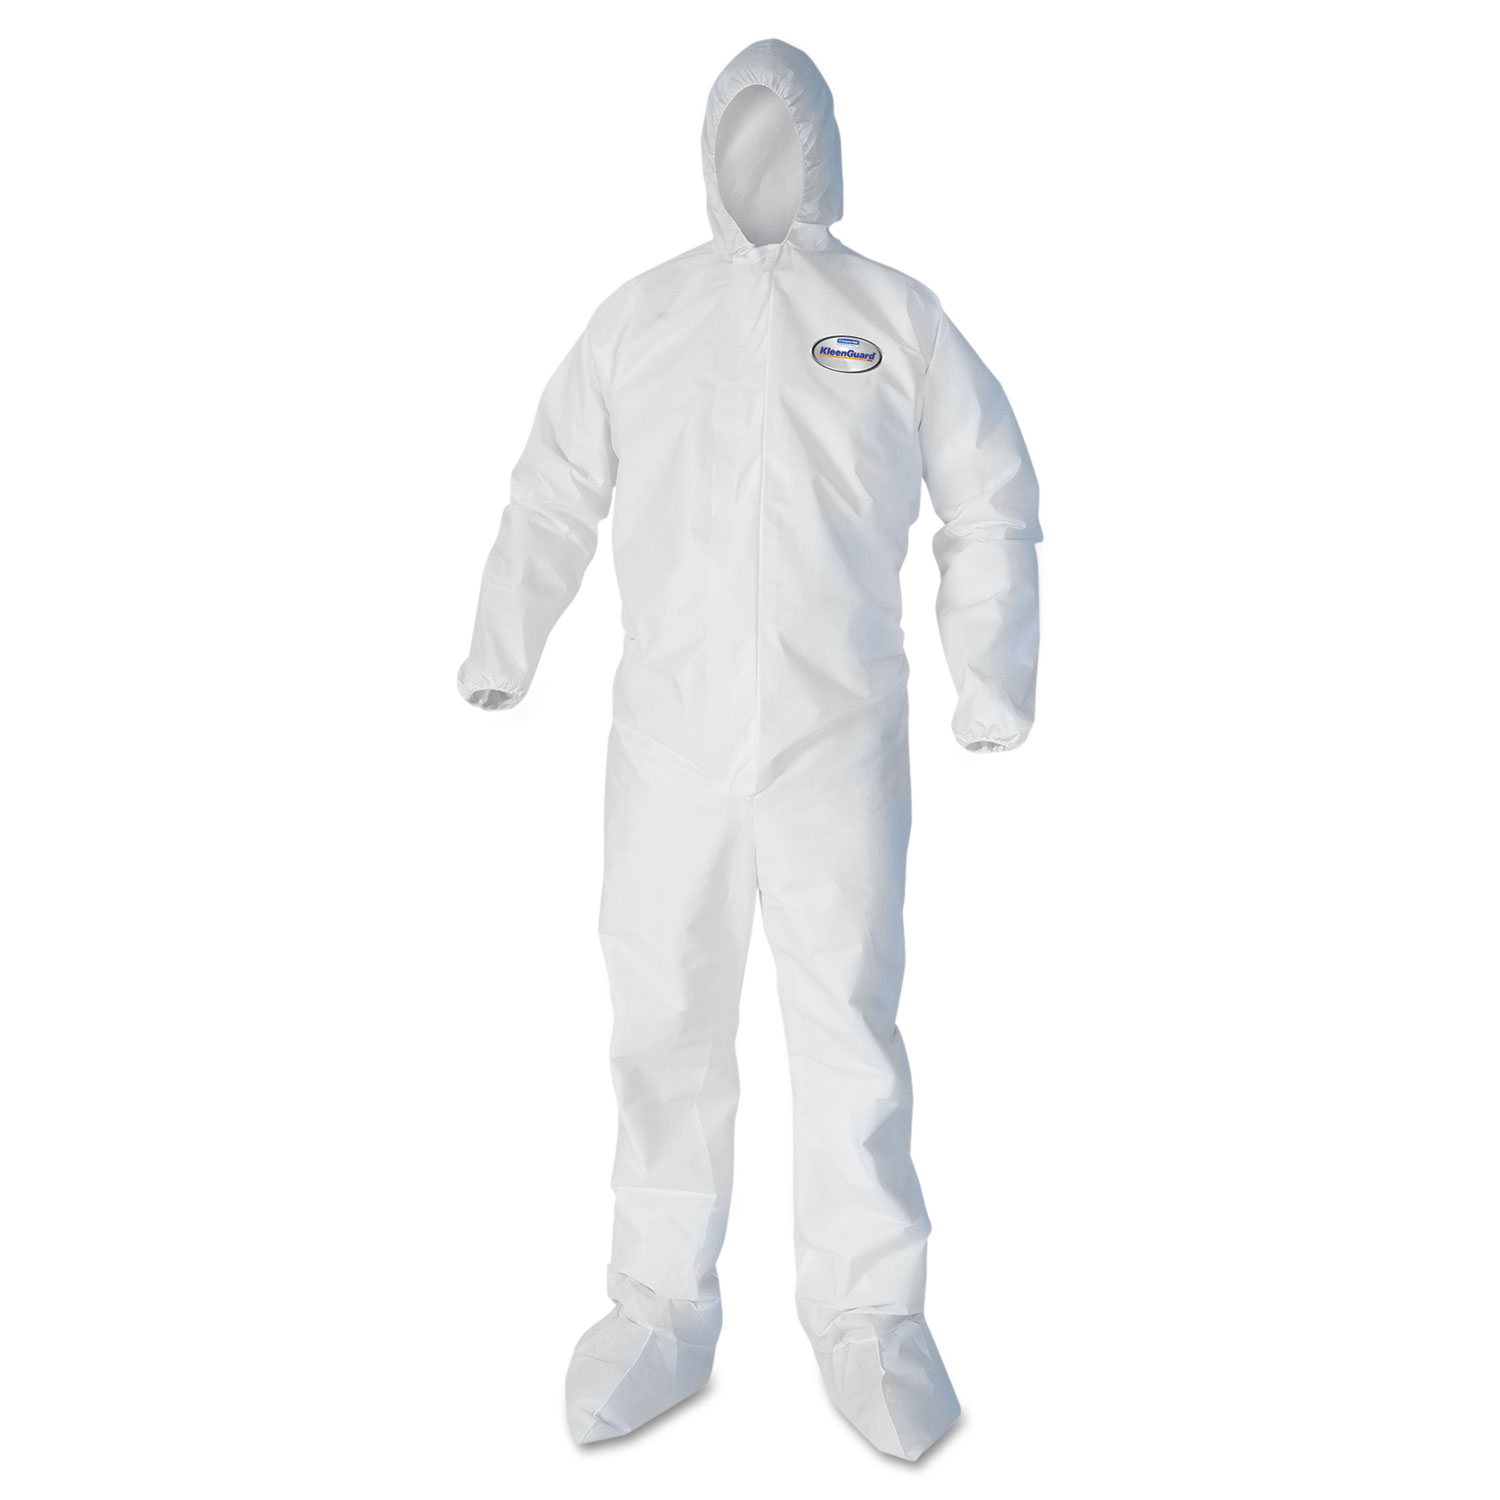 A30 Elastic Back and Cuff Hooded/Boots Coveralls, White, Large, 25/Carton